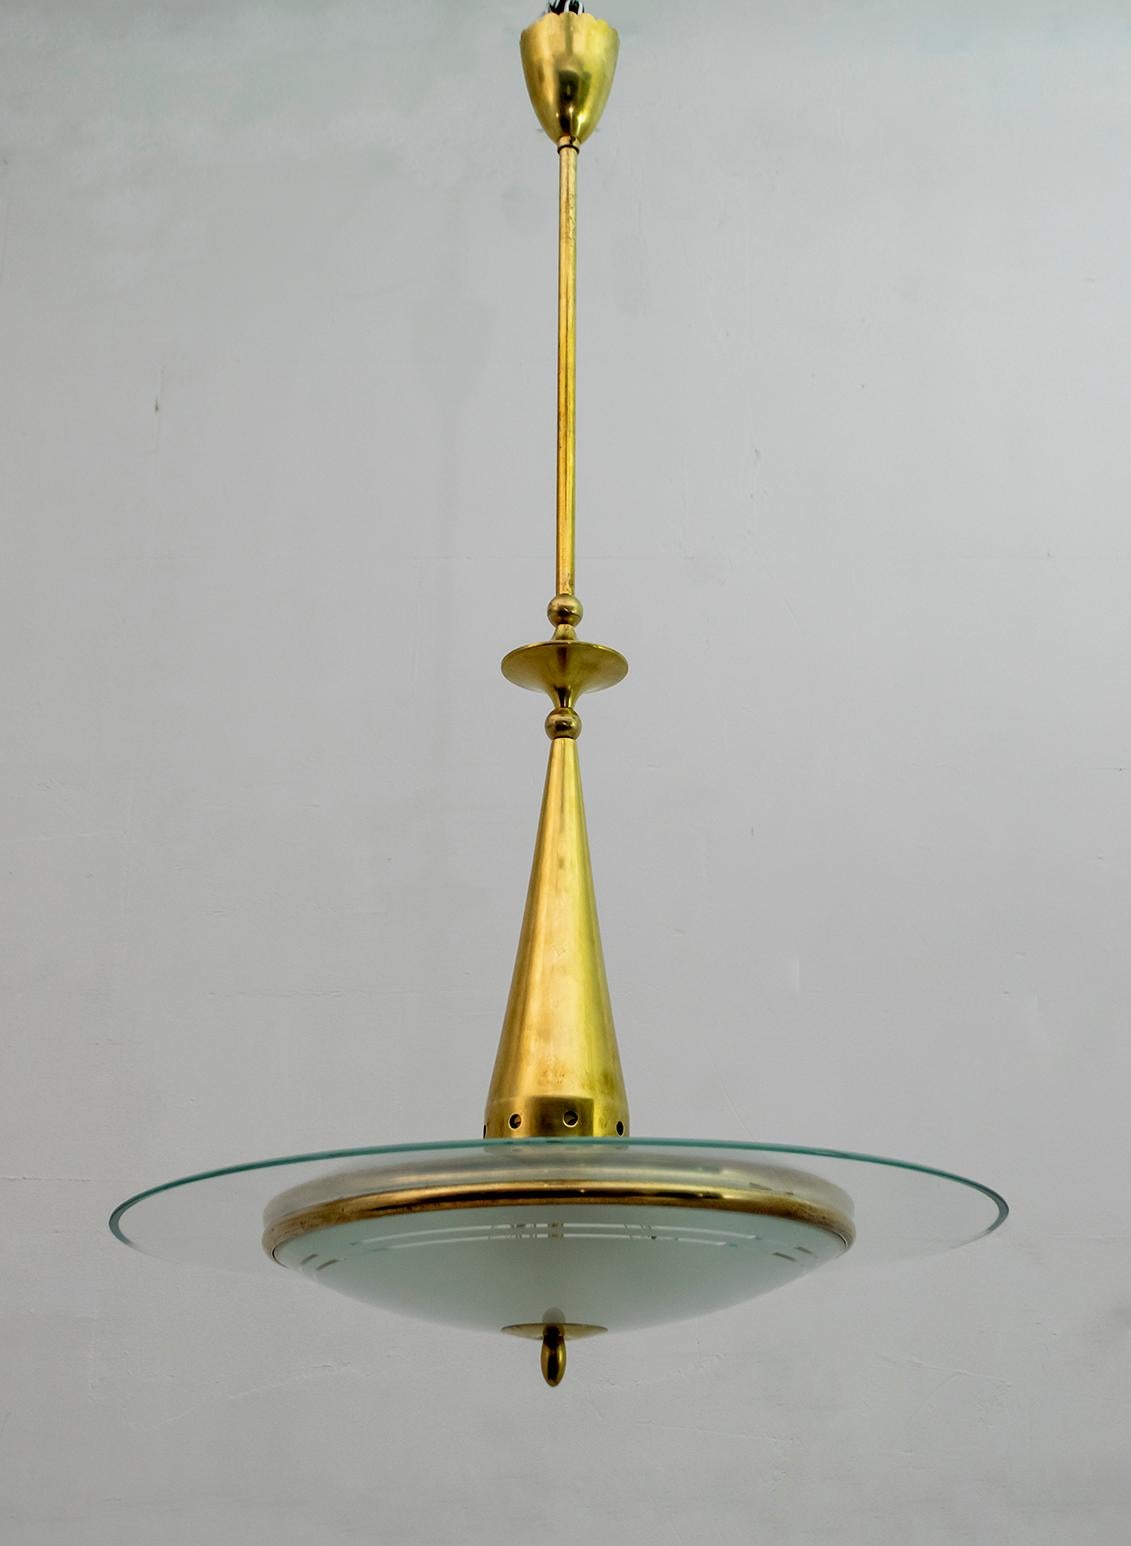 Beautiful Italian chandelier made by Fontana Arte, 1950s. The chandelier has a brass structure, the pendant is made with a cup that covers the wires in the upper part, in the center we find geometric elements in brass for ornament. From the center